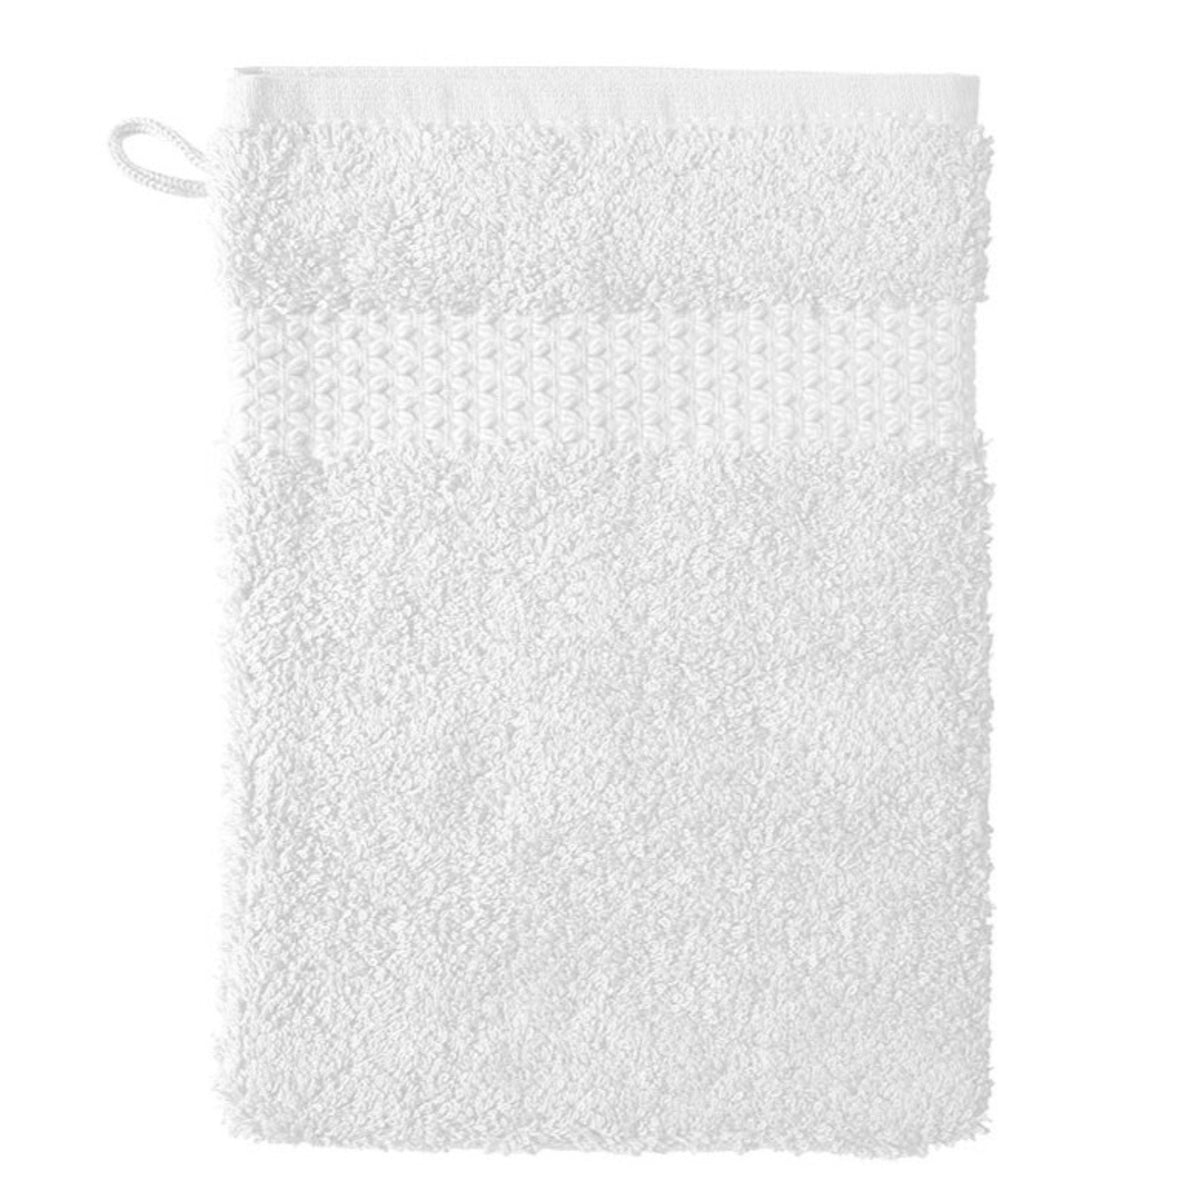 Bath Mitt of Yves Delorme Etoile Bath Collection in Blanc Color